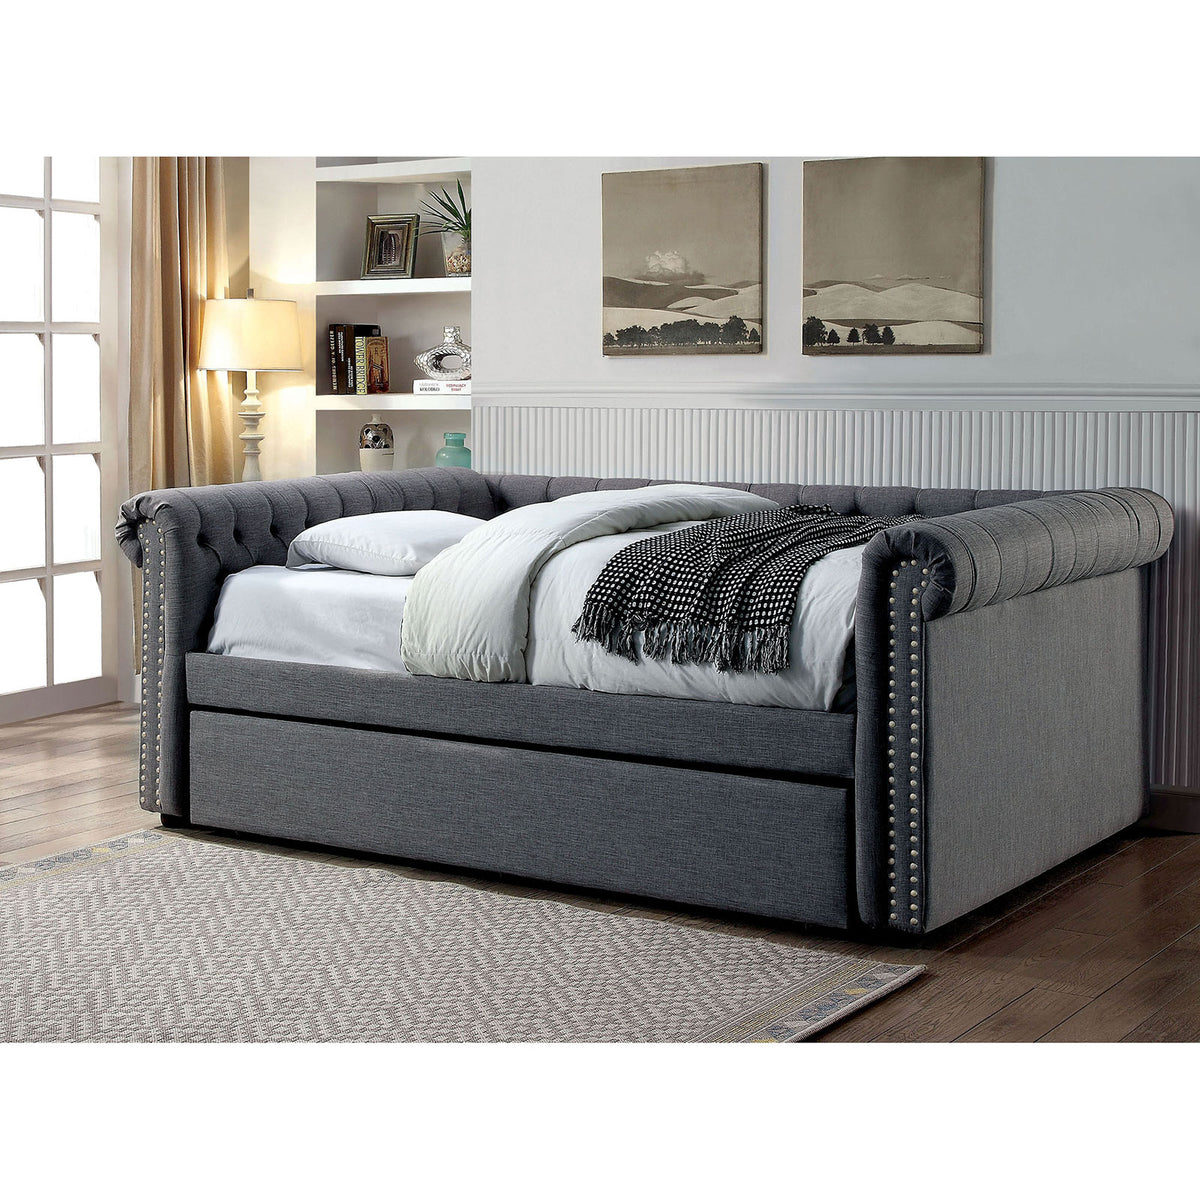 LEANNA Gray Full Daybed w/ Trundle, Gray  Las Vegas Furniture Stores